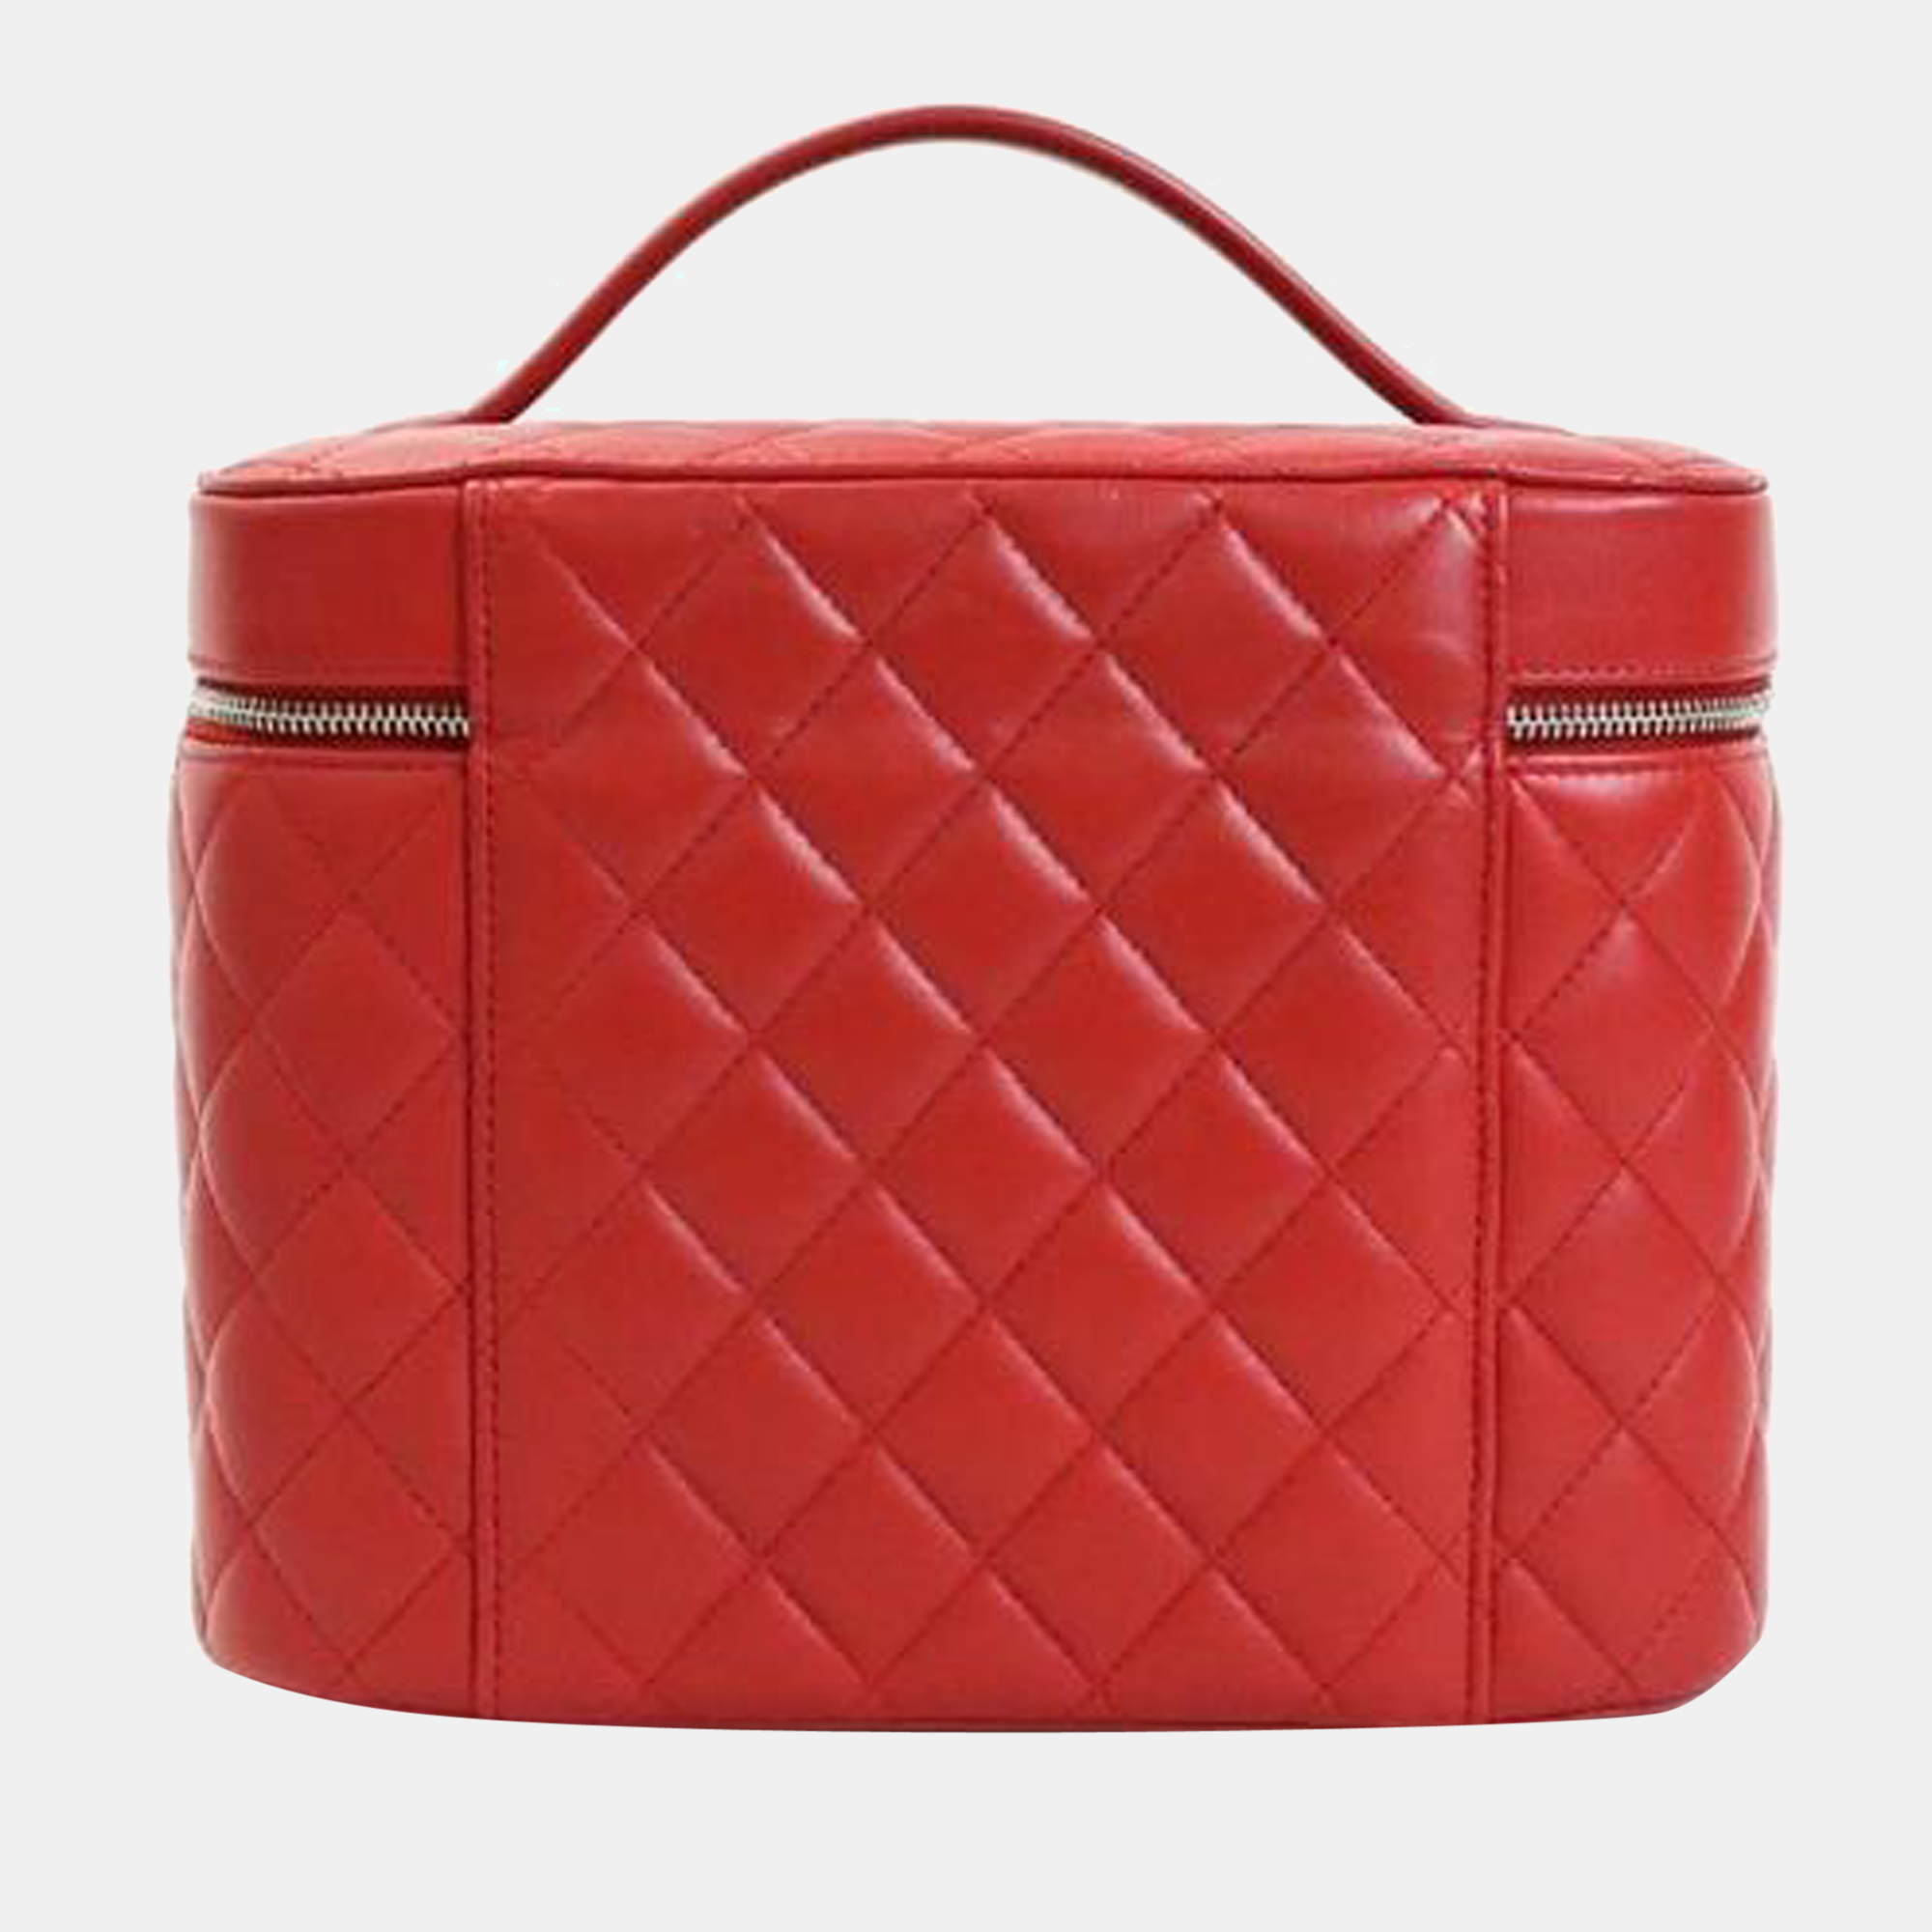 Chanel Red Leather Top Handle Vanity Case